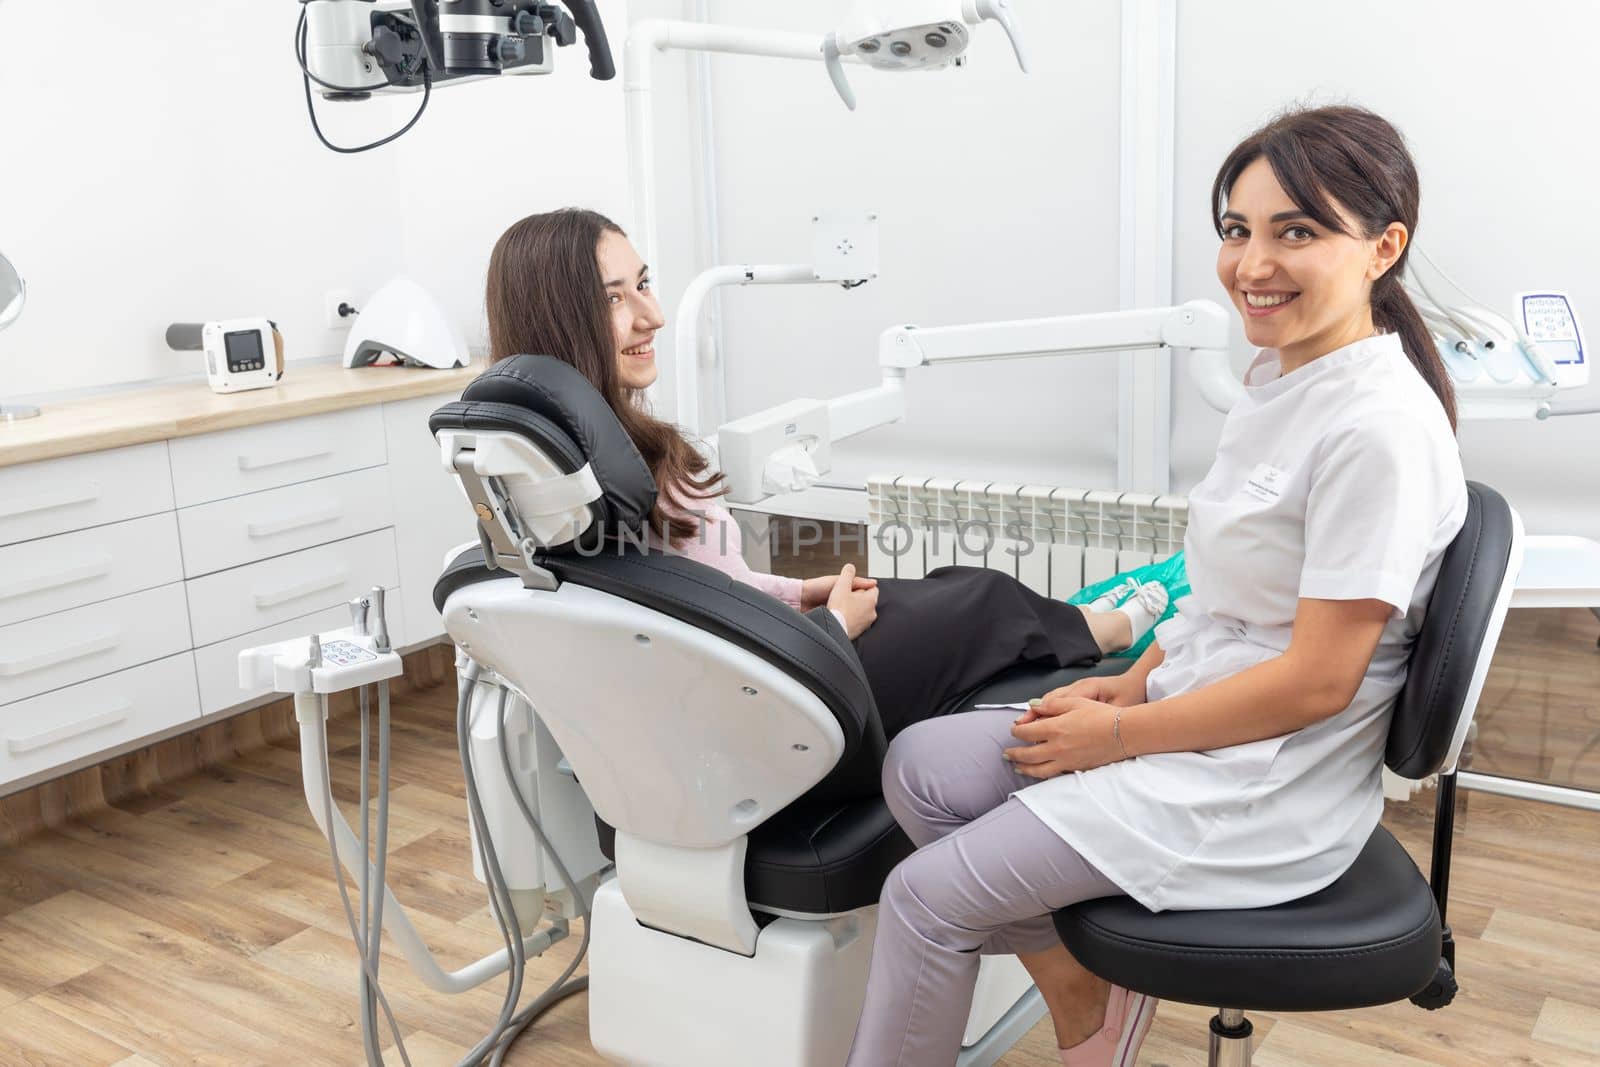 Female dentist talking to a young patient during appointment in modern dental clinic before teeth treatment by Mariakray